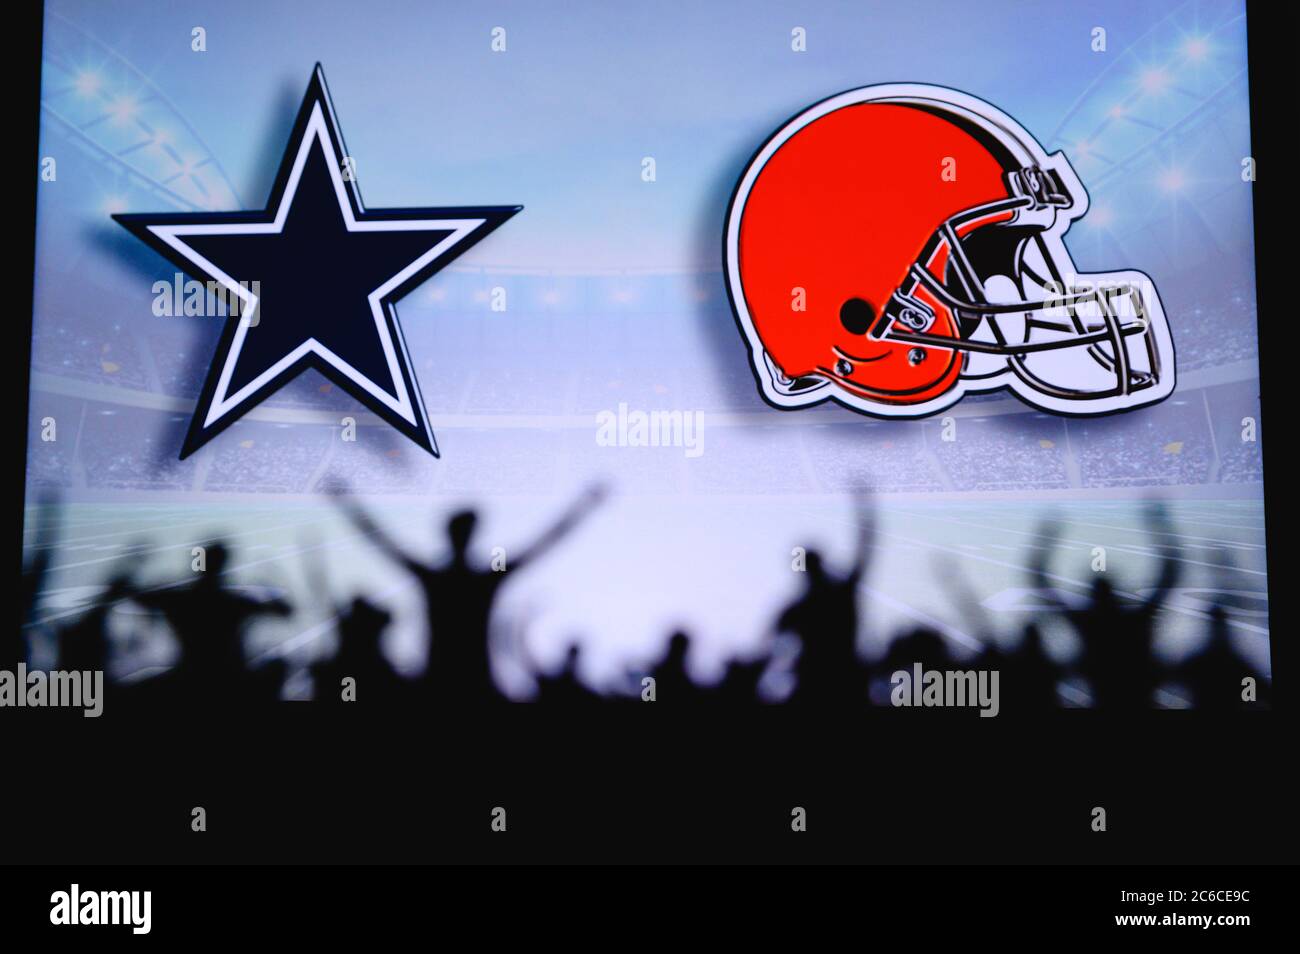 Dallas Cowboys vs. Cleveland Browns. Fans support on NFL Game. Silhouette of supporters, big screen with two rivals in background. Stock Photo